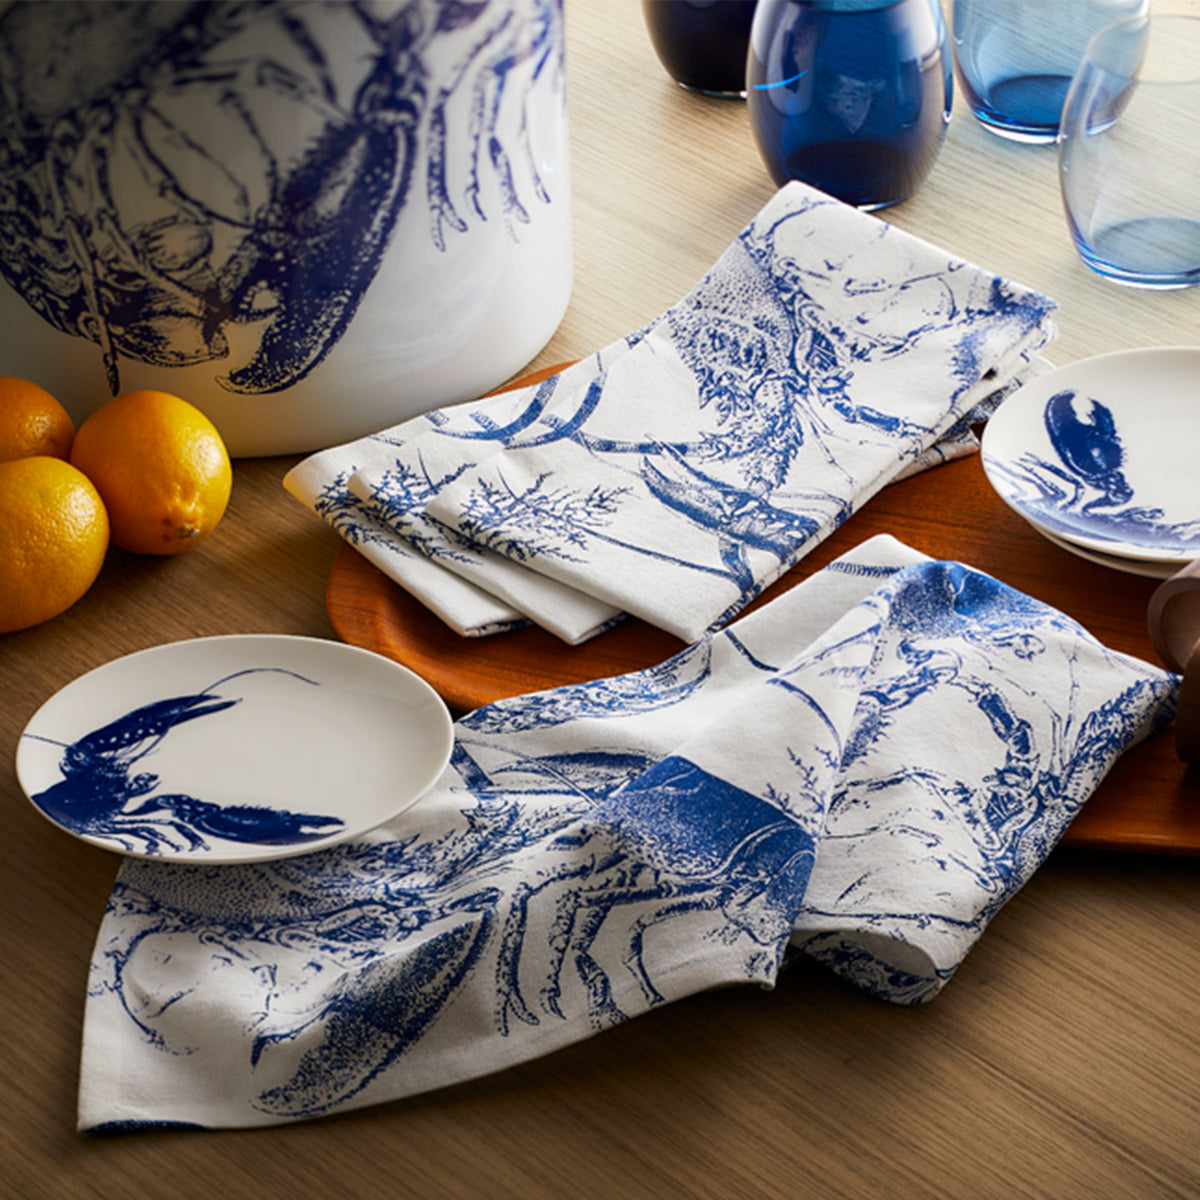 A set of Lobster Blue Canapé Plates by Caskata Artisanal Home on a tray with oranges and orange juice.